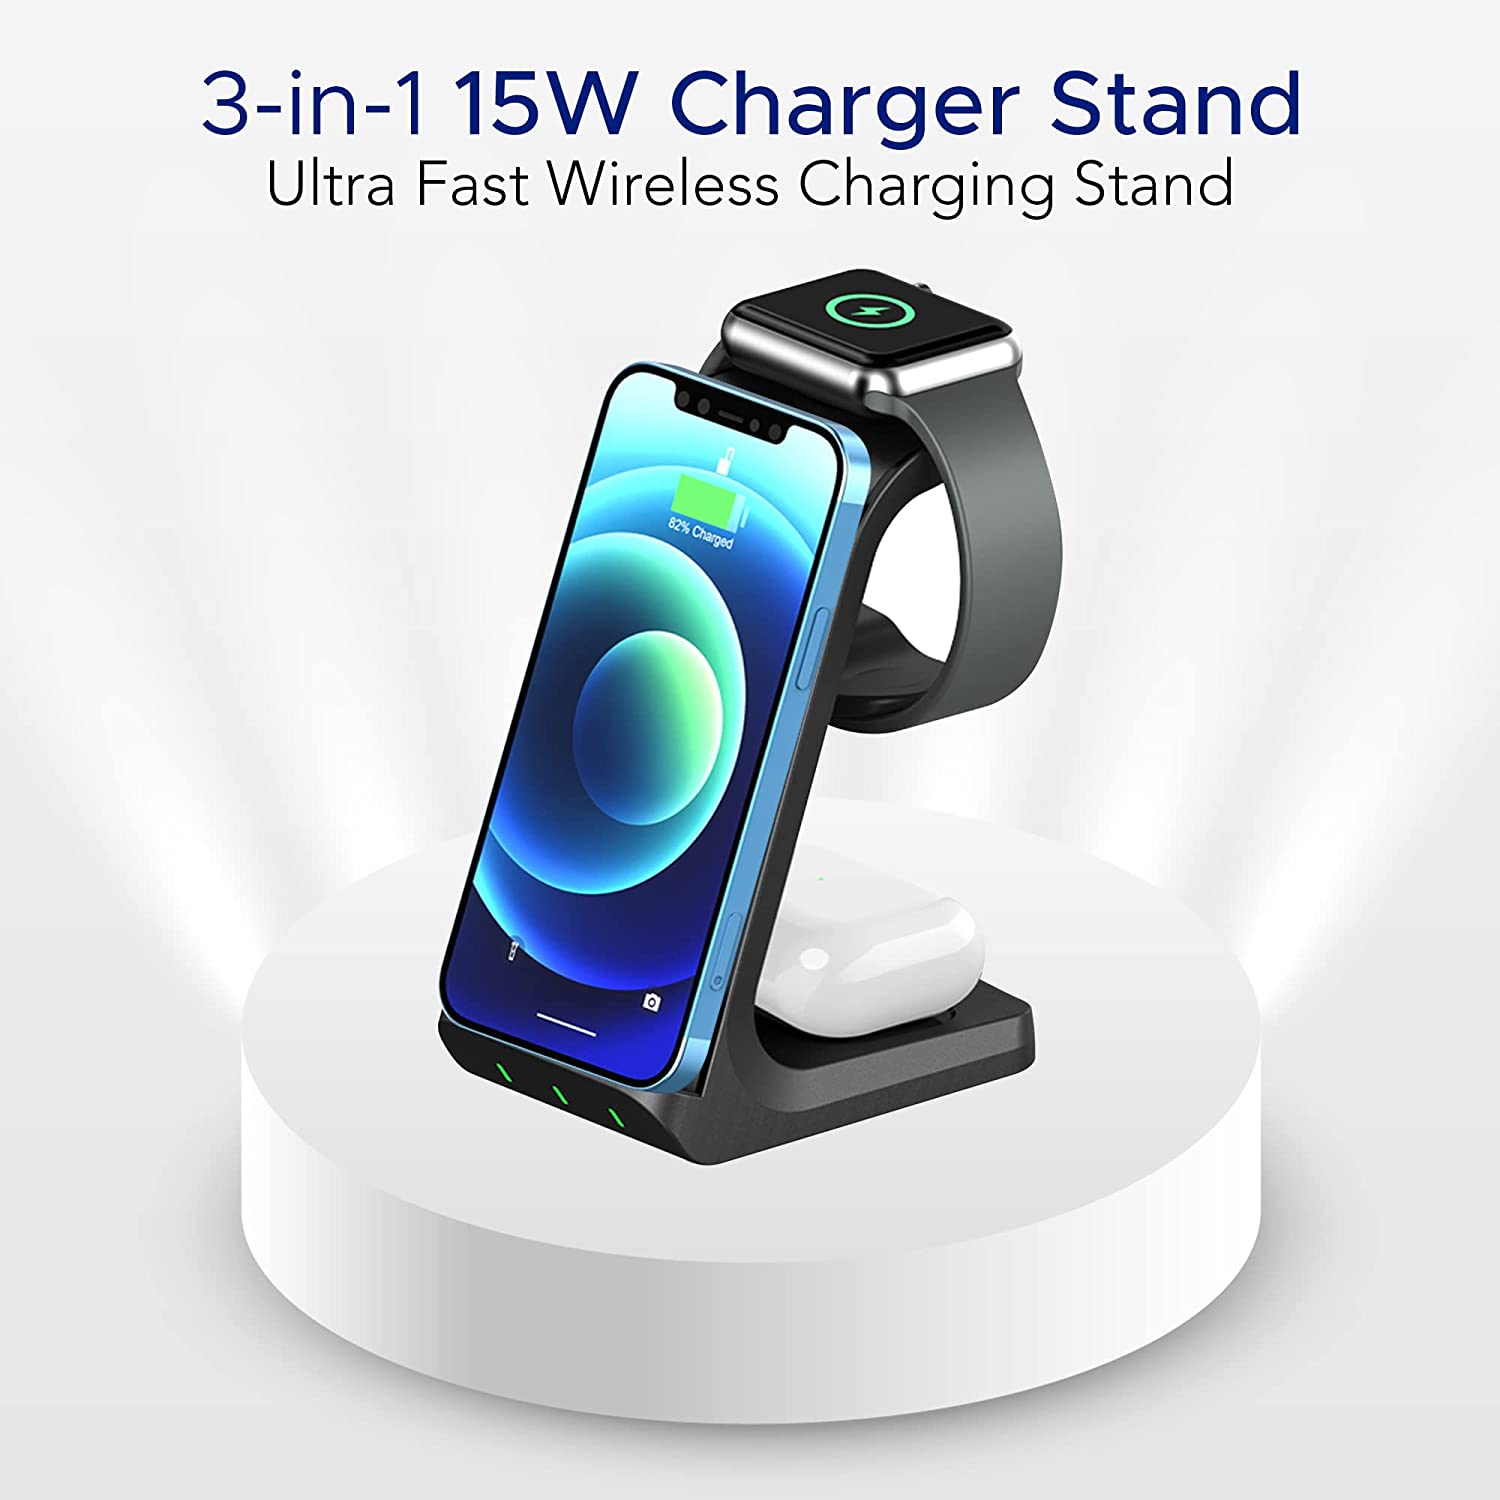 3-in-1 Charger Stand Multi Device Wireless Charging Dock Station compatible with Apple iPhone, Samsung, Android, iWatch, Airpods, Google Pixel